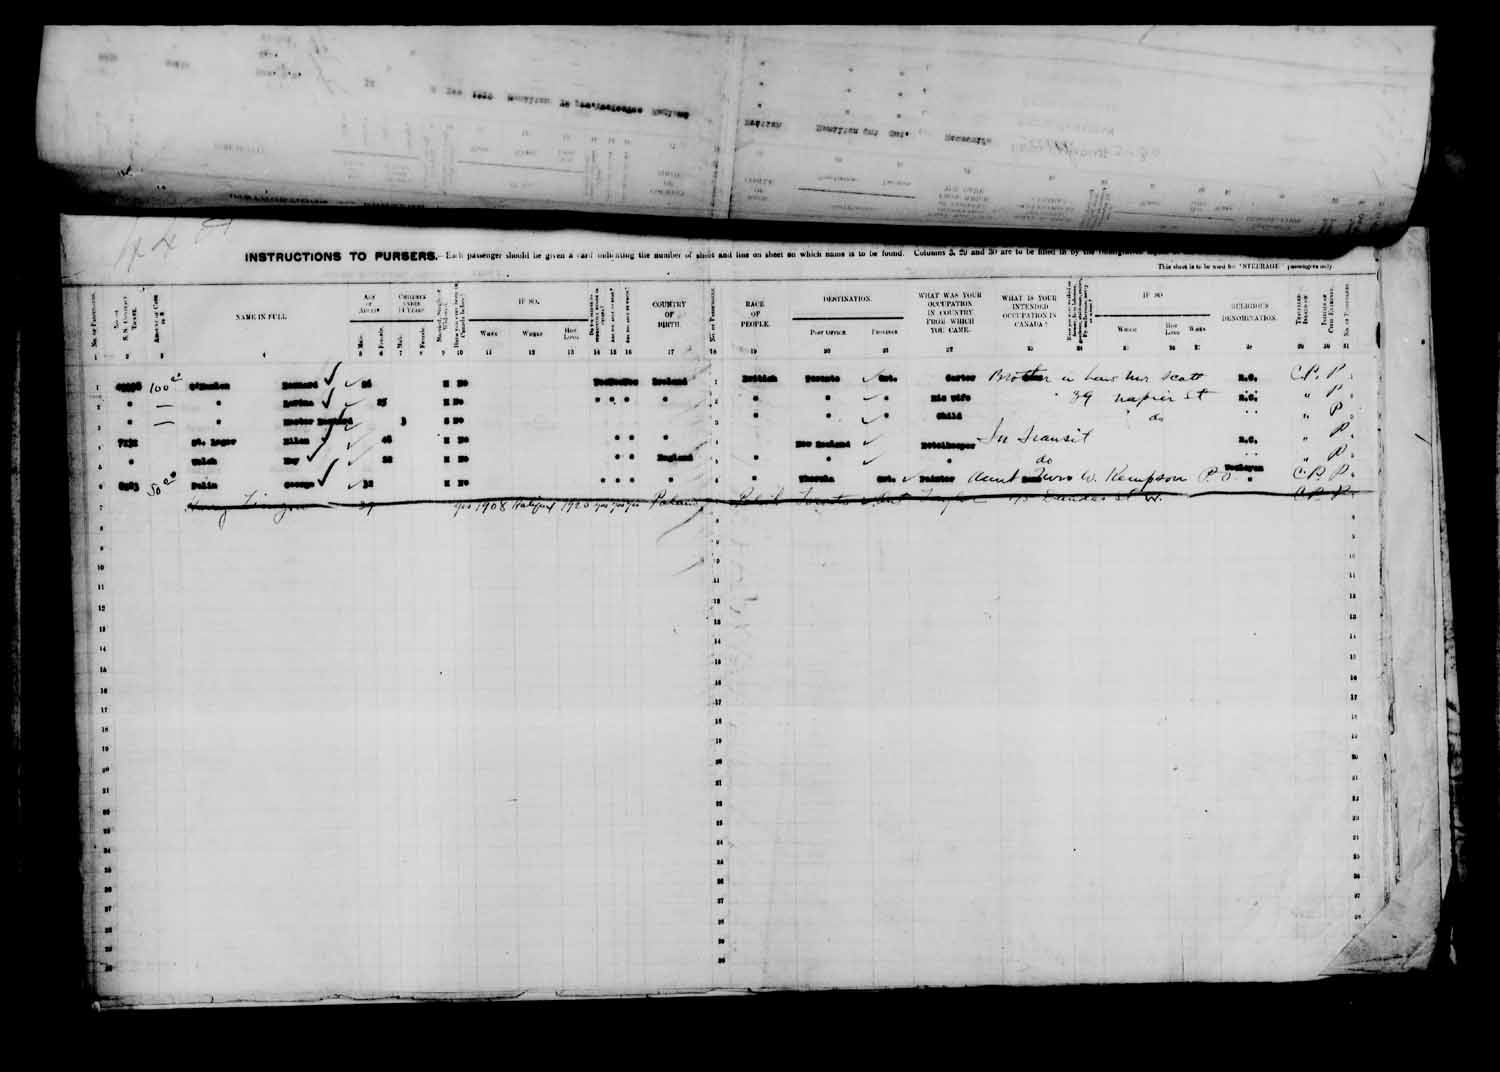 Digitized page of Passenger Lists for Image No.: e003610672